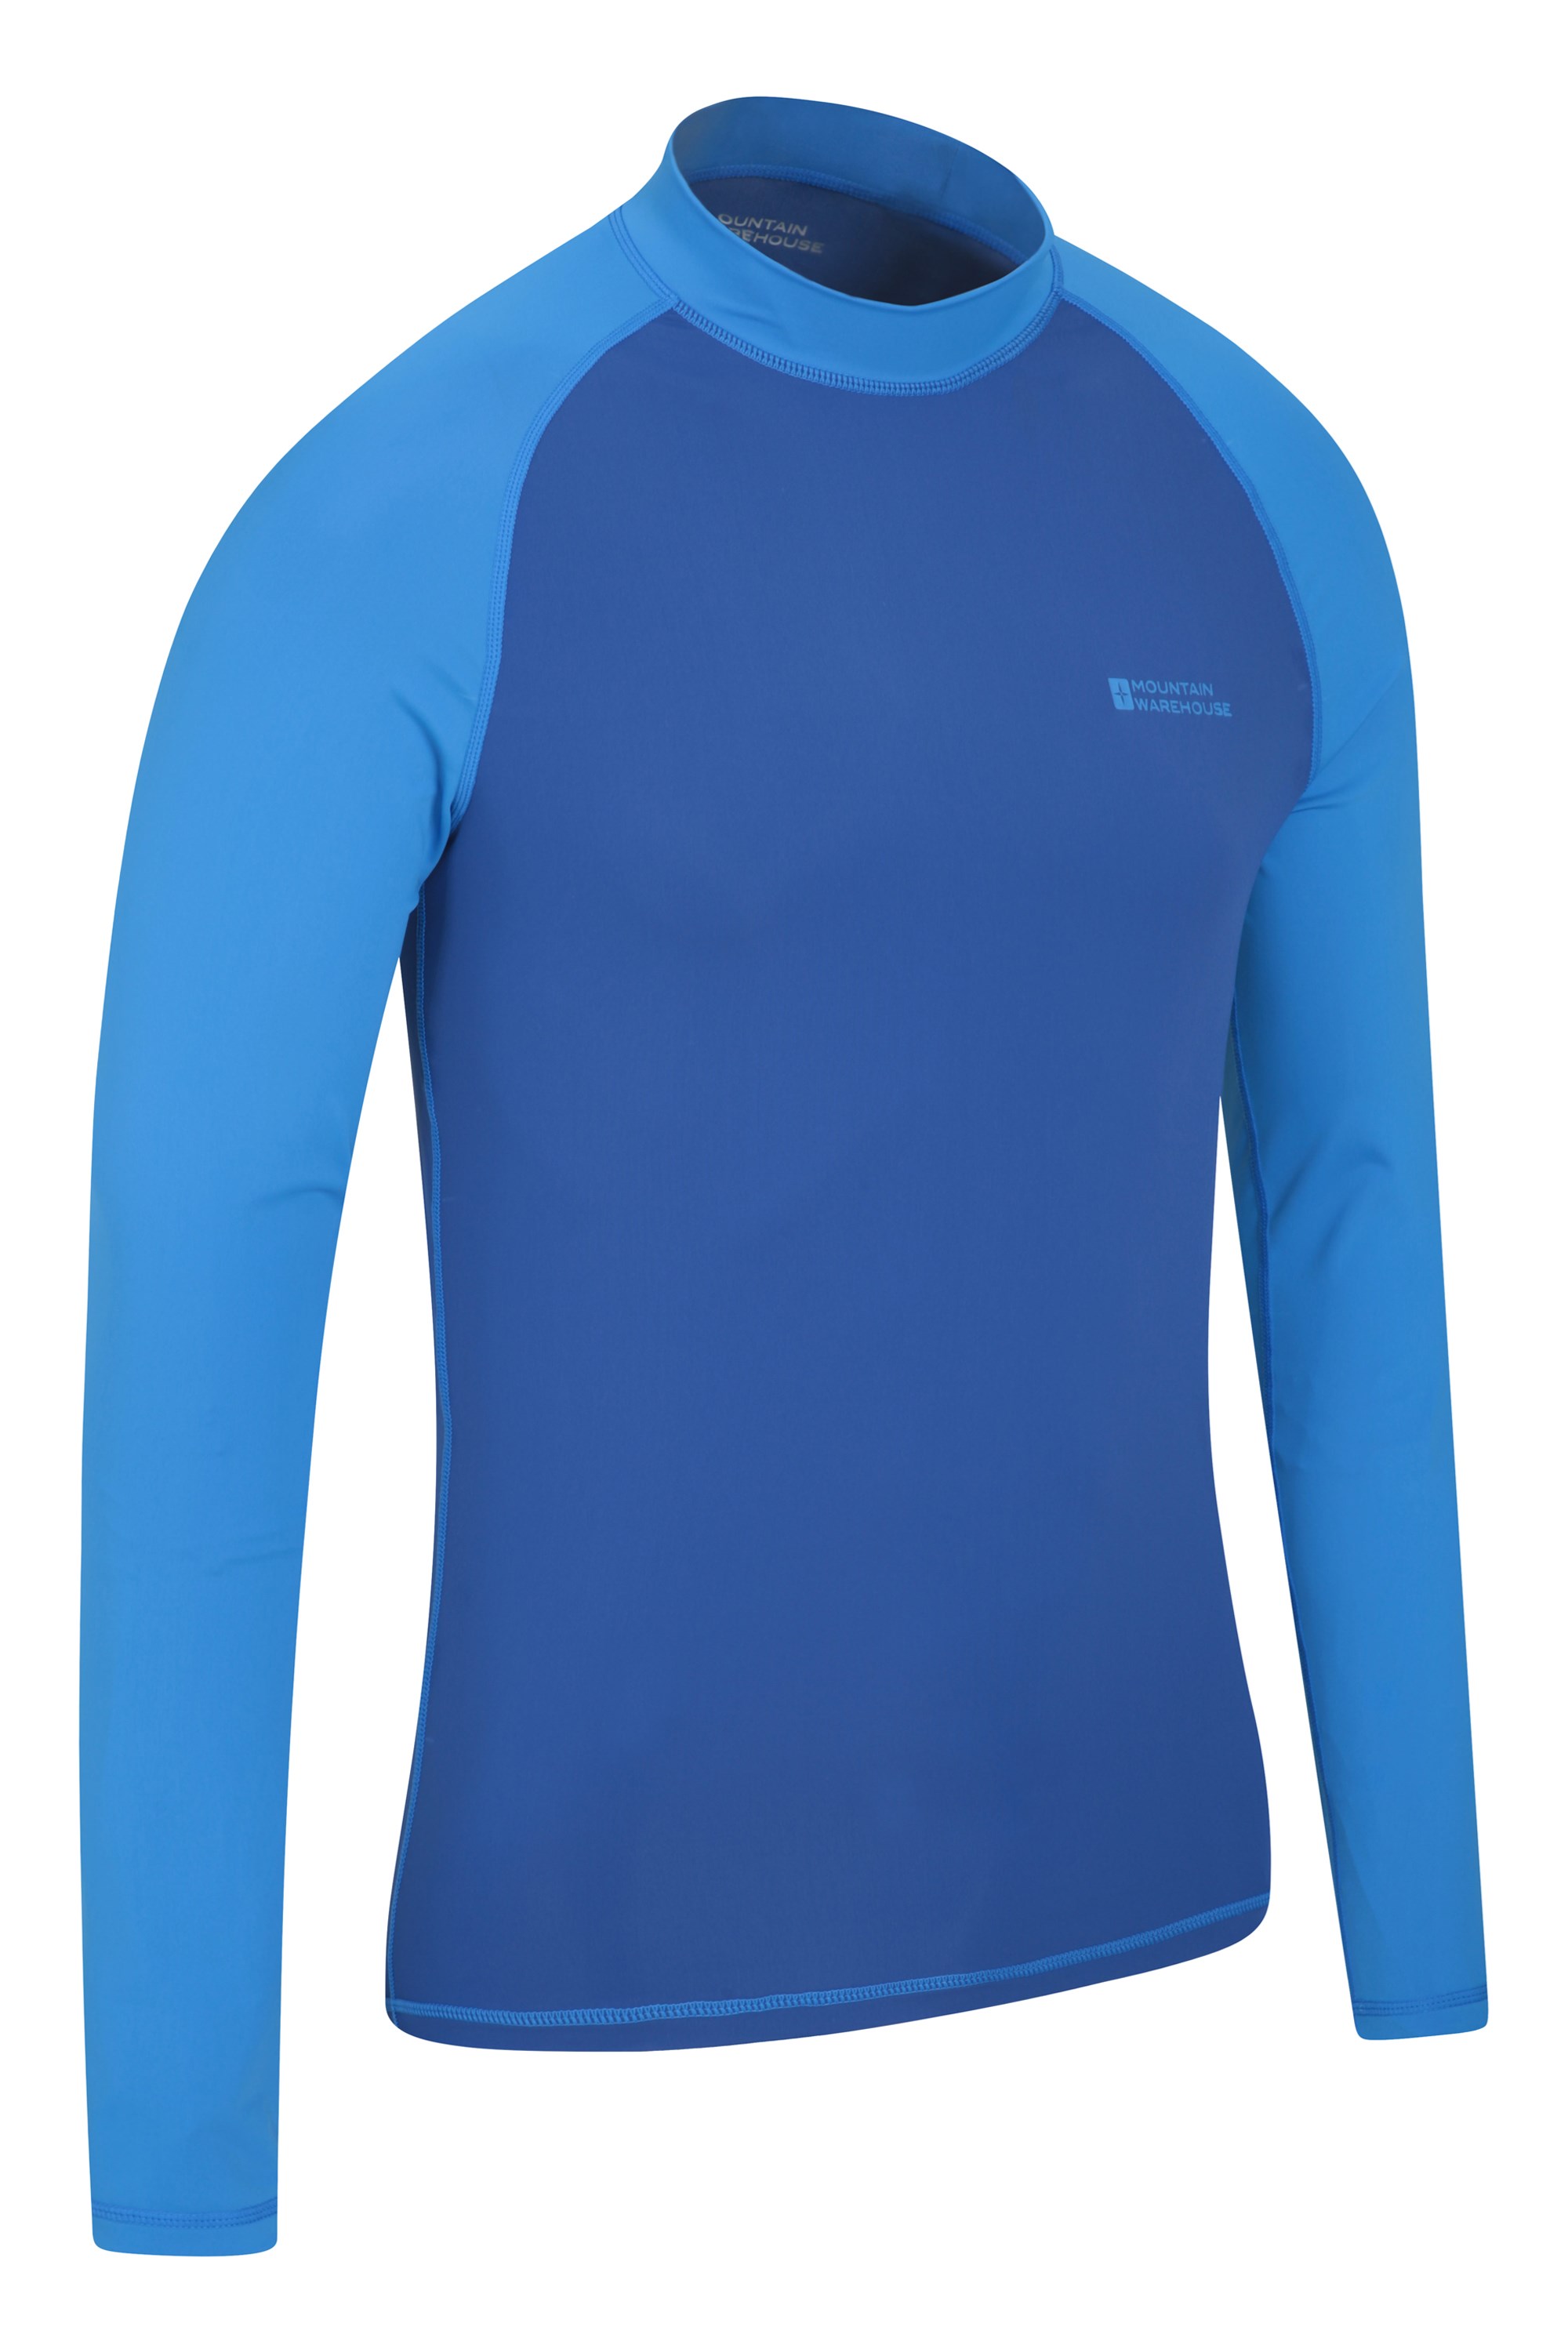 Lightweight Mountain Warehouse Mens UV Rash Vest UPF50+ UV Protection Rash Guard Quick Drying Rash Top Flat Seams Stretch Fabric for Swimming & Under A Wetsuit 